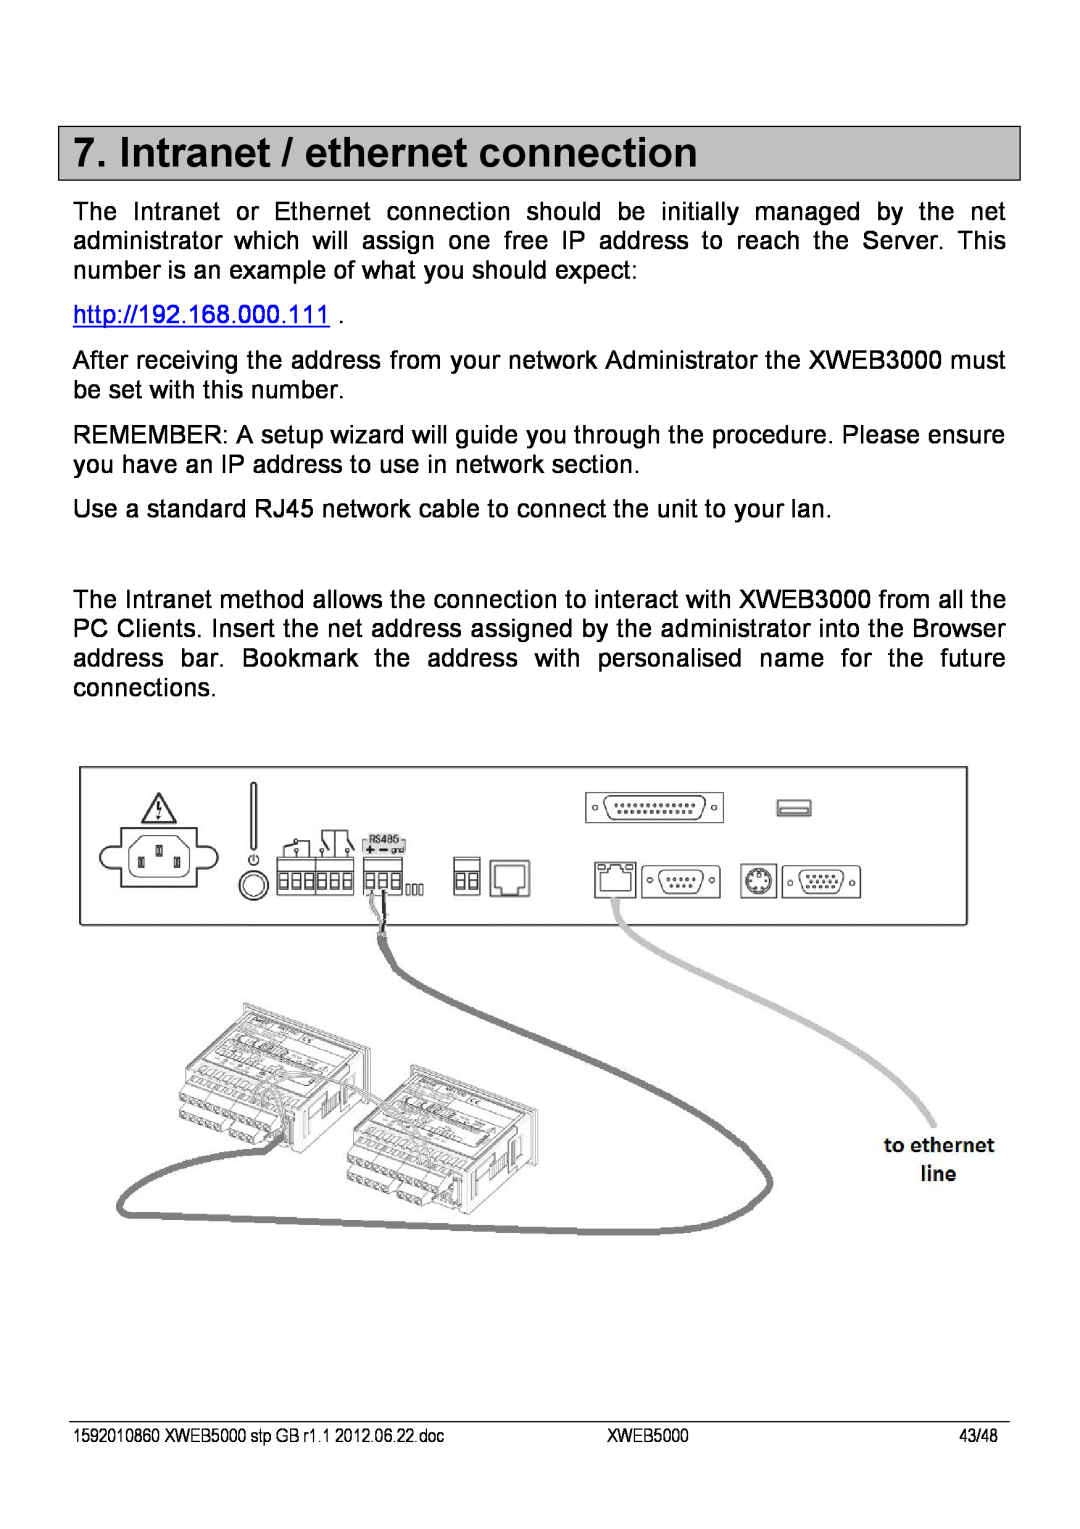 Emerson XWEB5000 manual Intranet / ethernet connection 